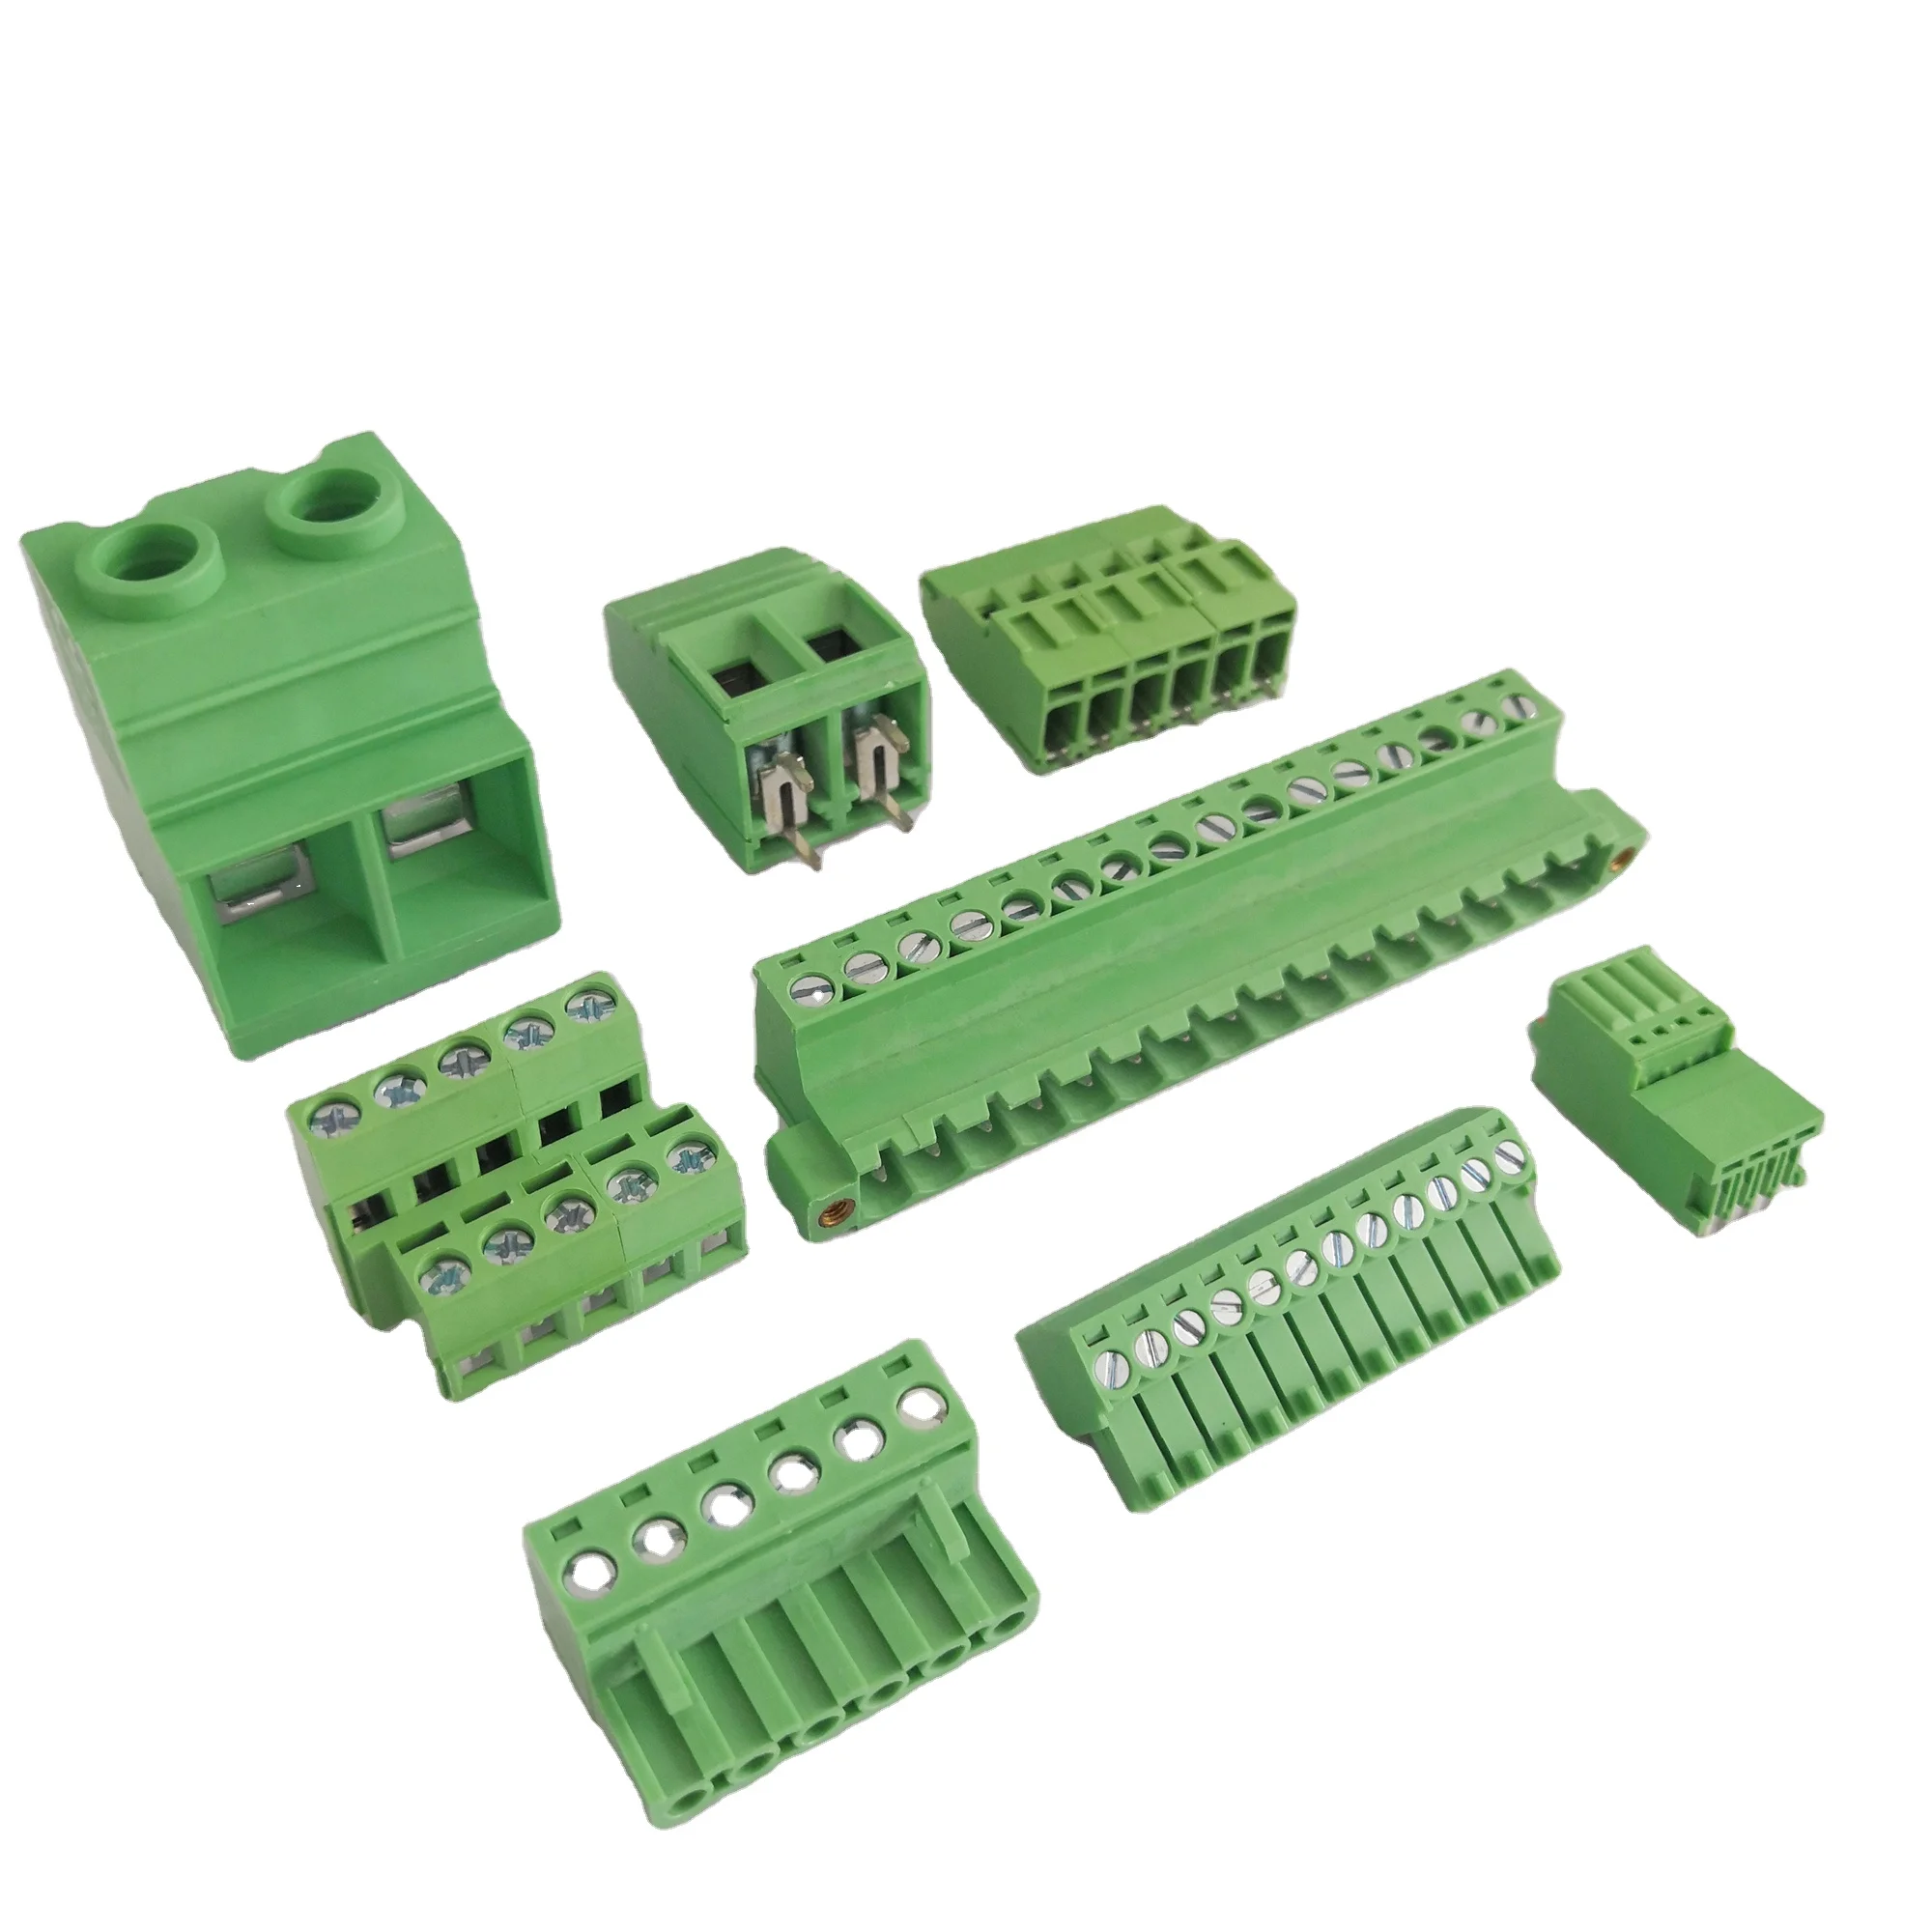 50 pcs Pitch 3.5mm Angle 6 way/pin Screw Terminal Block Connector Pluggable Type 